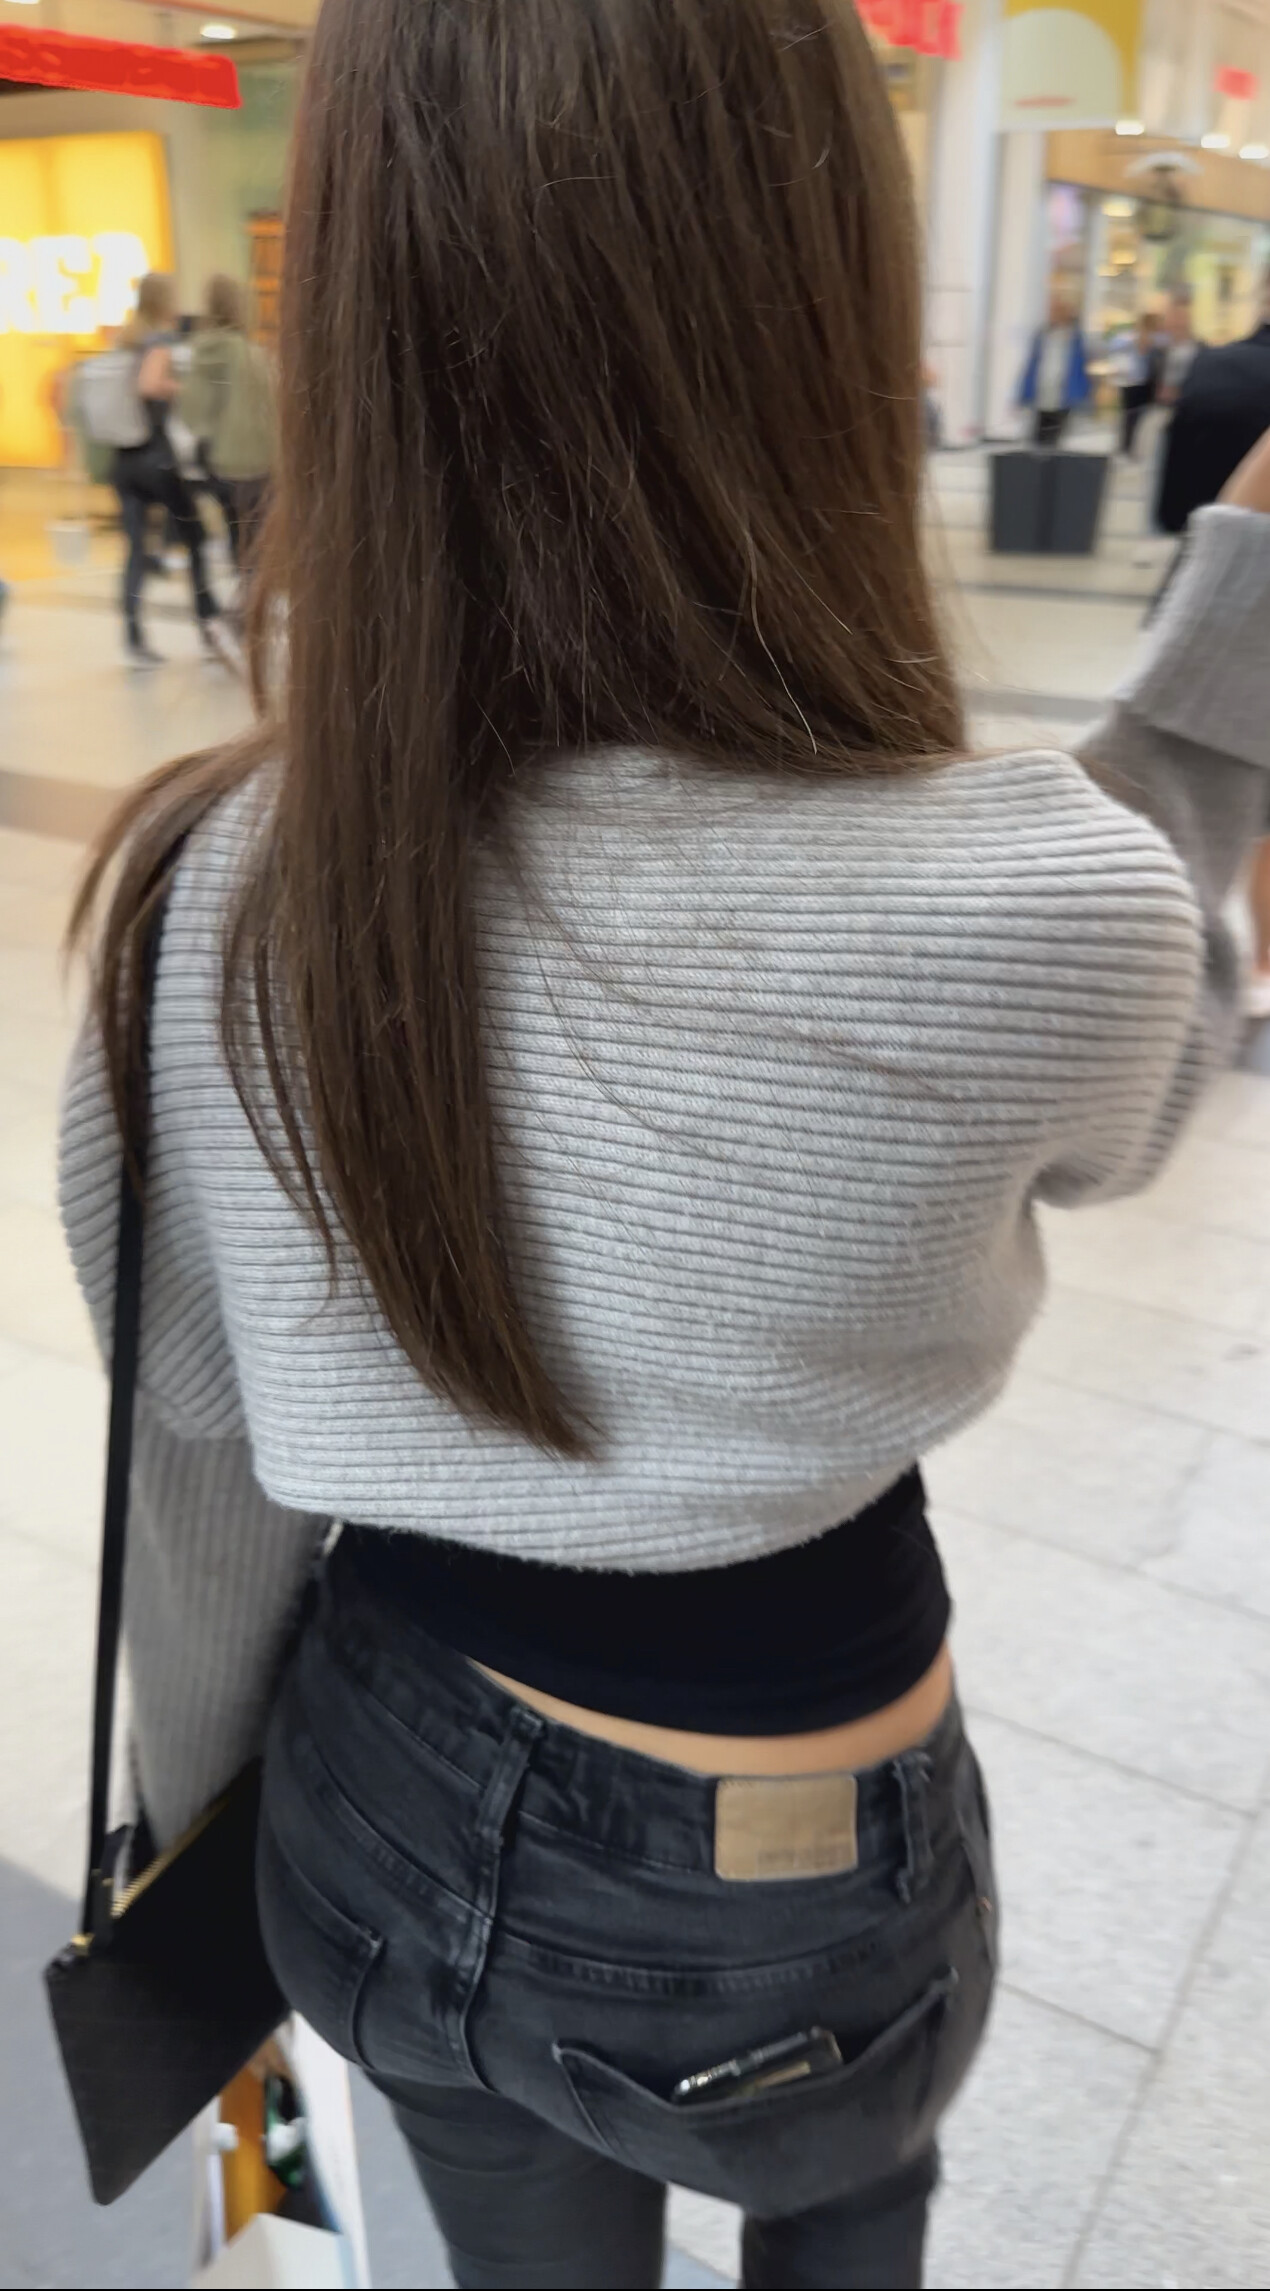 Perfect Jeans, Perfect Girl [oc] ❤️‍🔥 - Tight Jeans - Forum